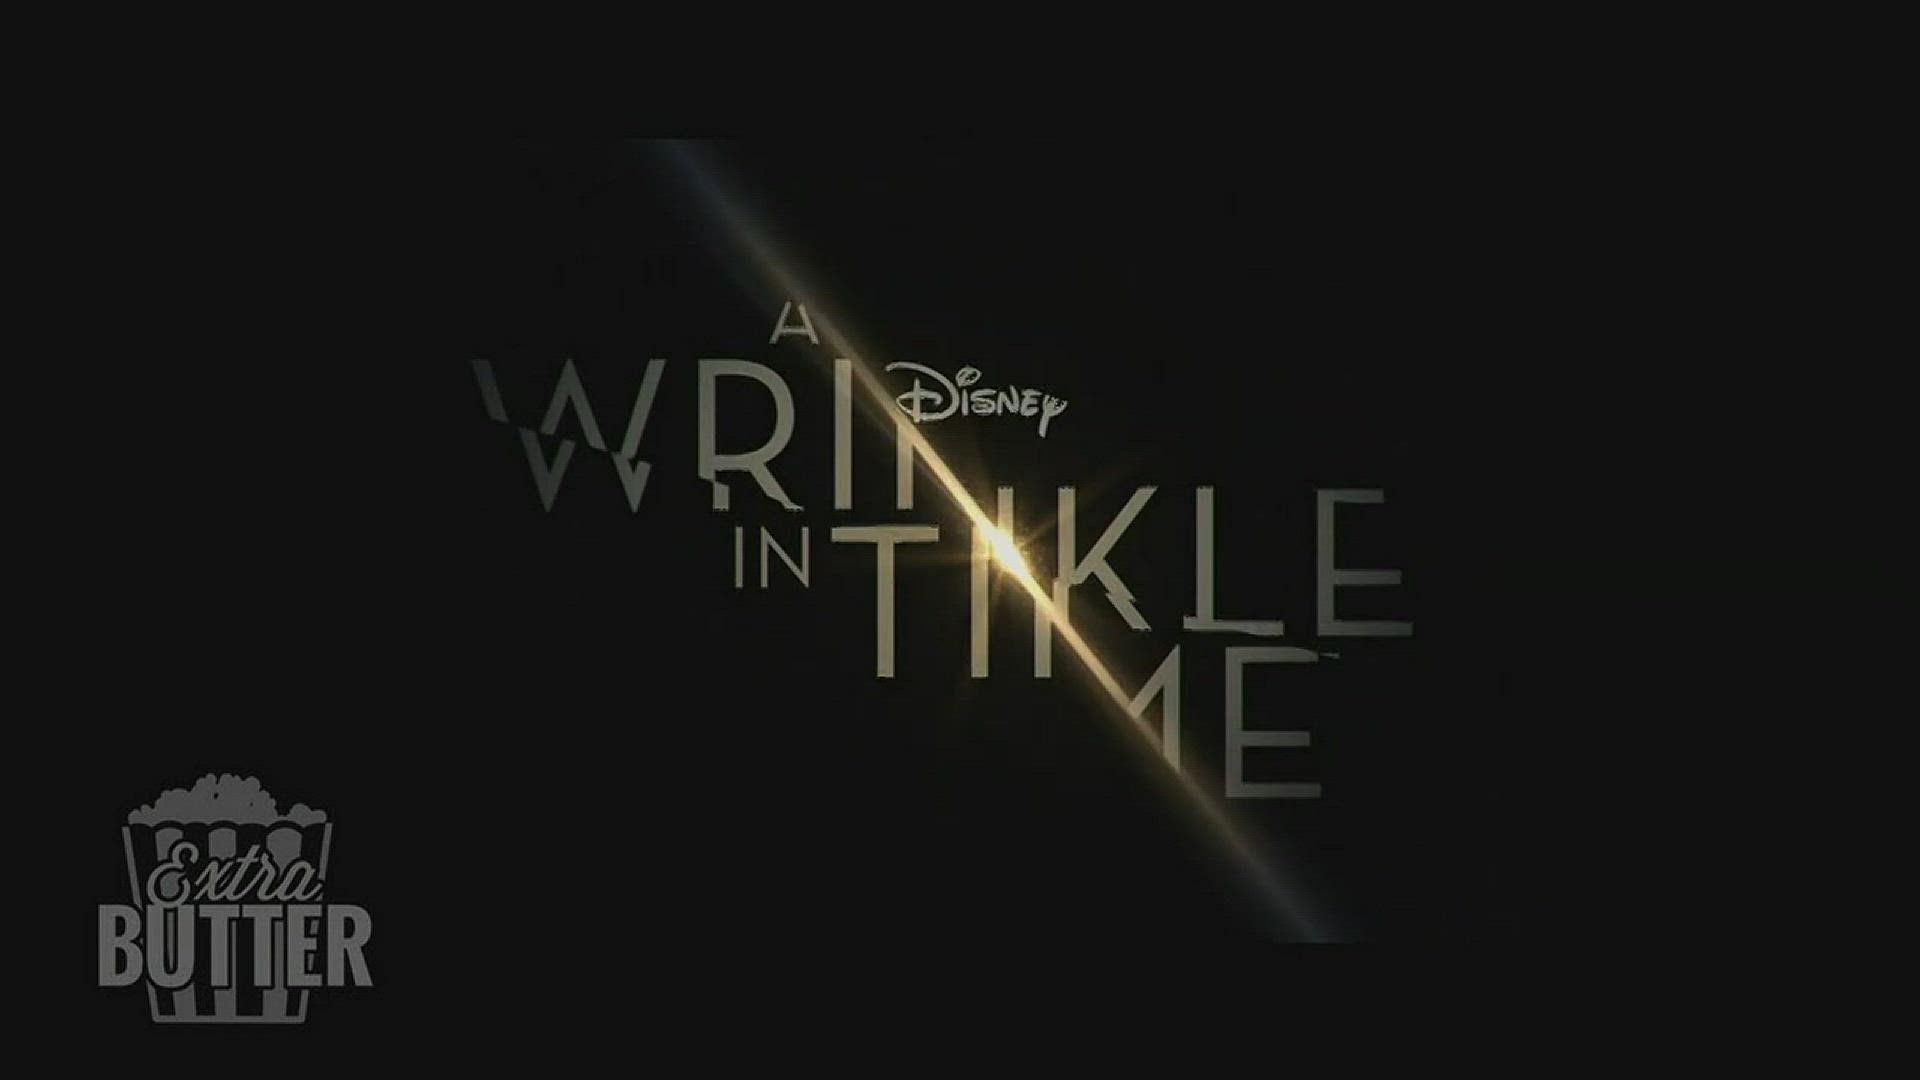 New in theaters, "A Wrinkle in Time" might be the film to knock off Black Panther from the top of the box office.